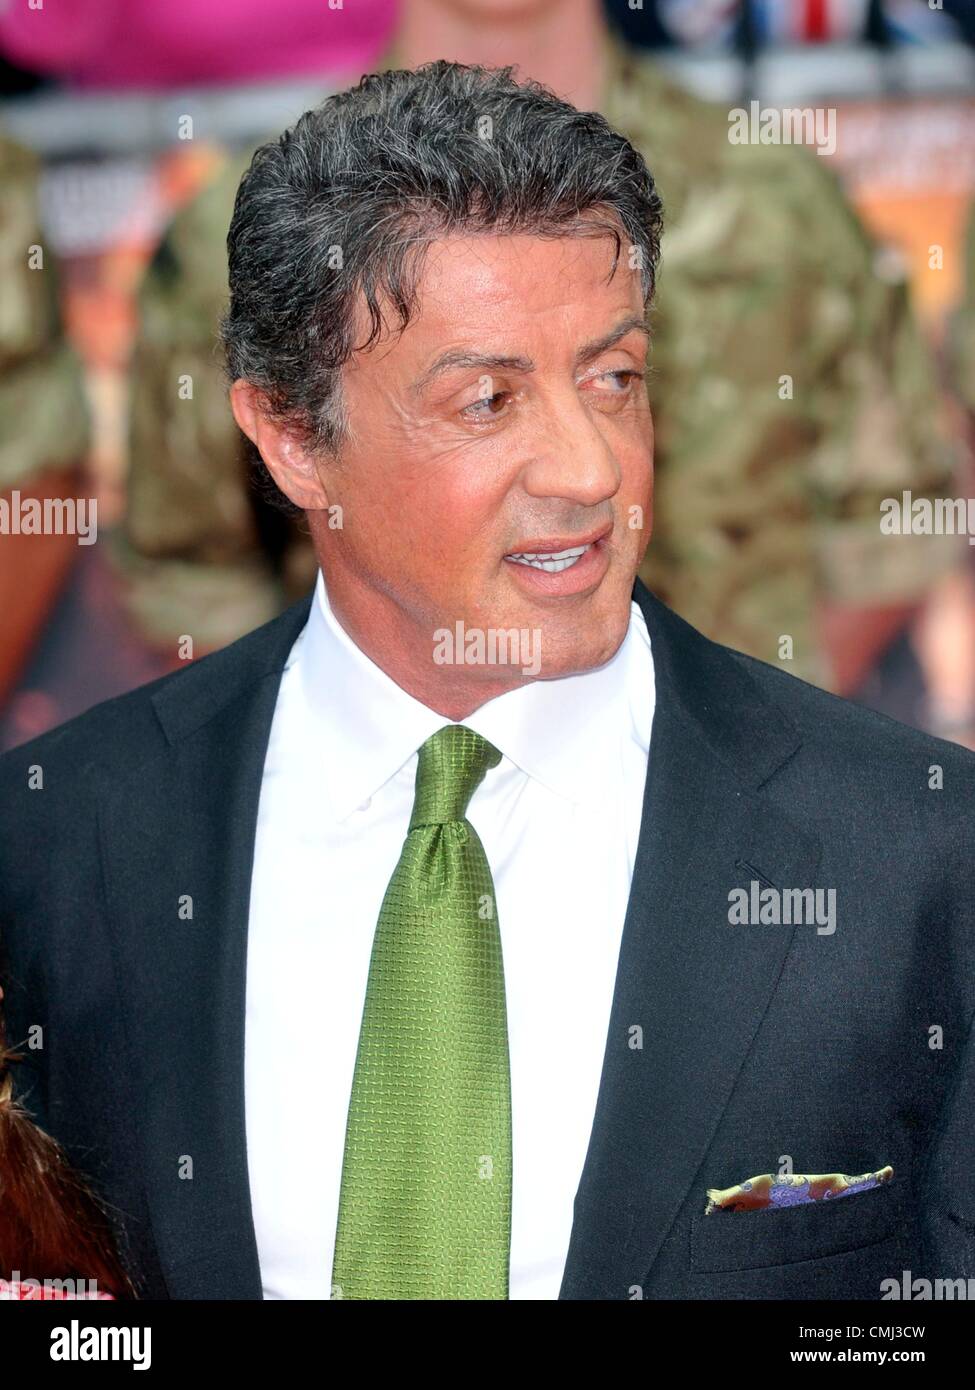 13. August 2012. Sylvester Stallone bei "The Expendables 2" UK Premiere anlässlich der Empire Leicester Square London, England - 13.08.12 Stockfoto